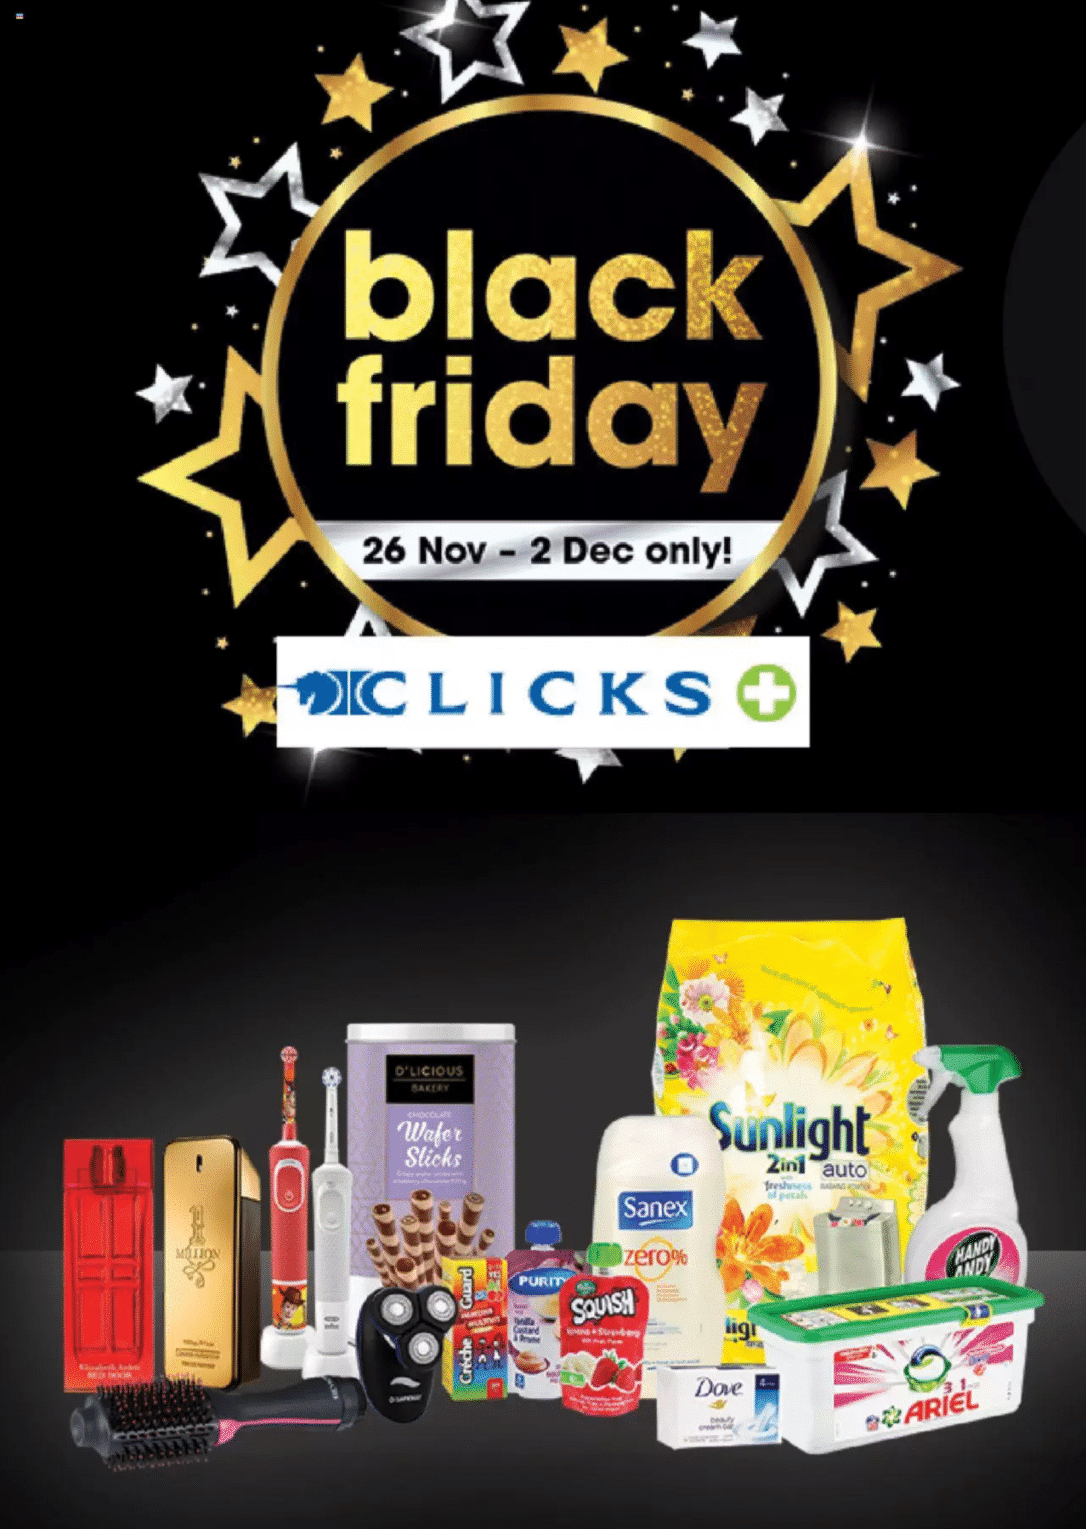 Clicks Black Friday Specials & Deals 2020 - What Stores Can You Black Friday Shop Online